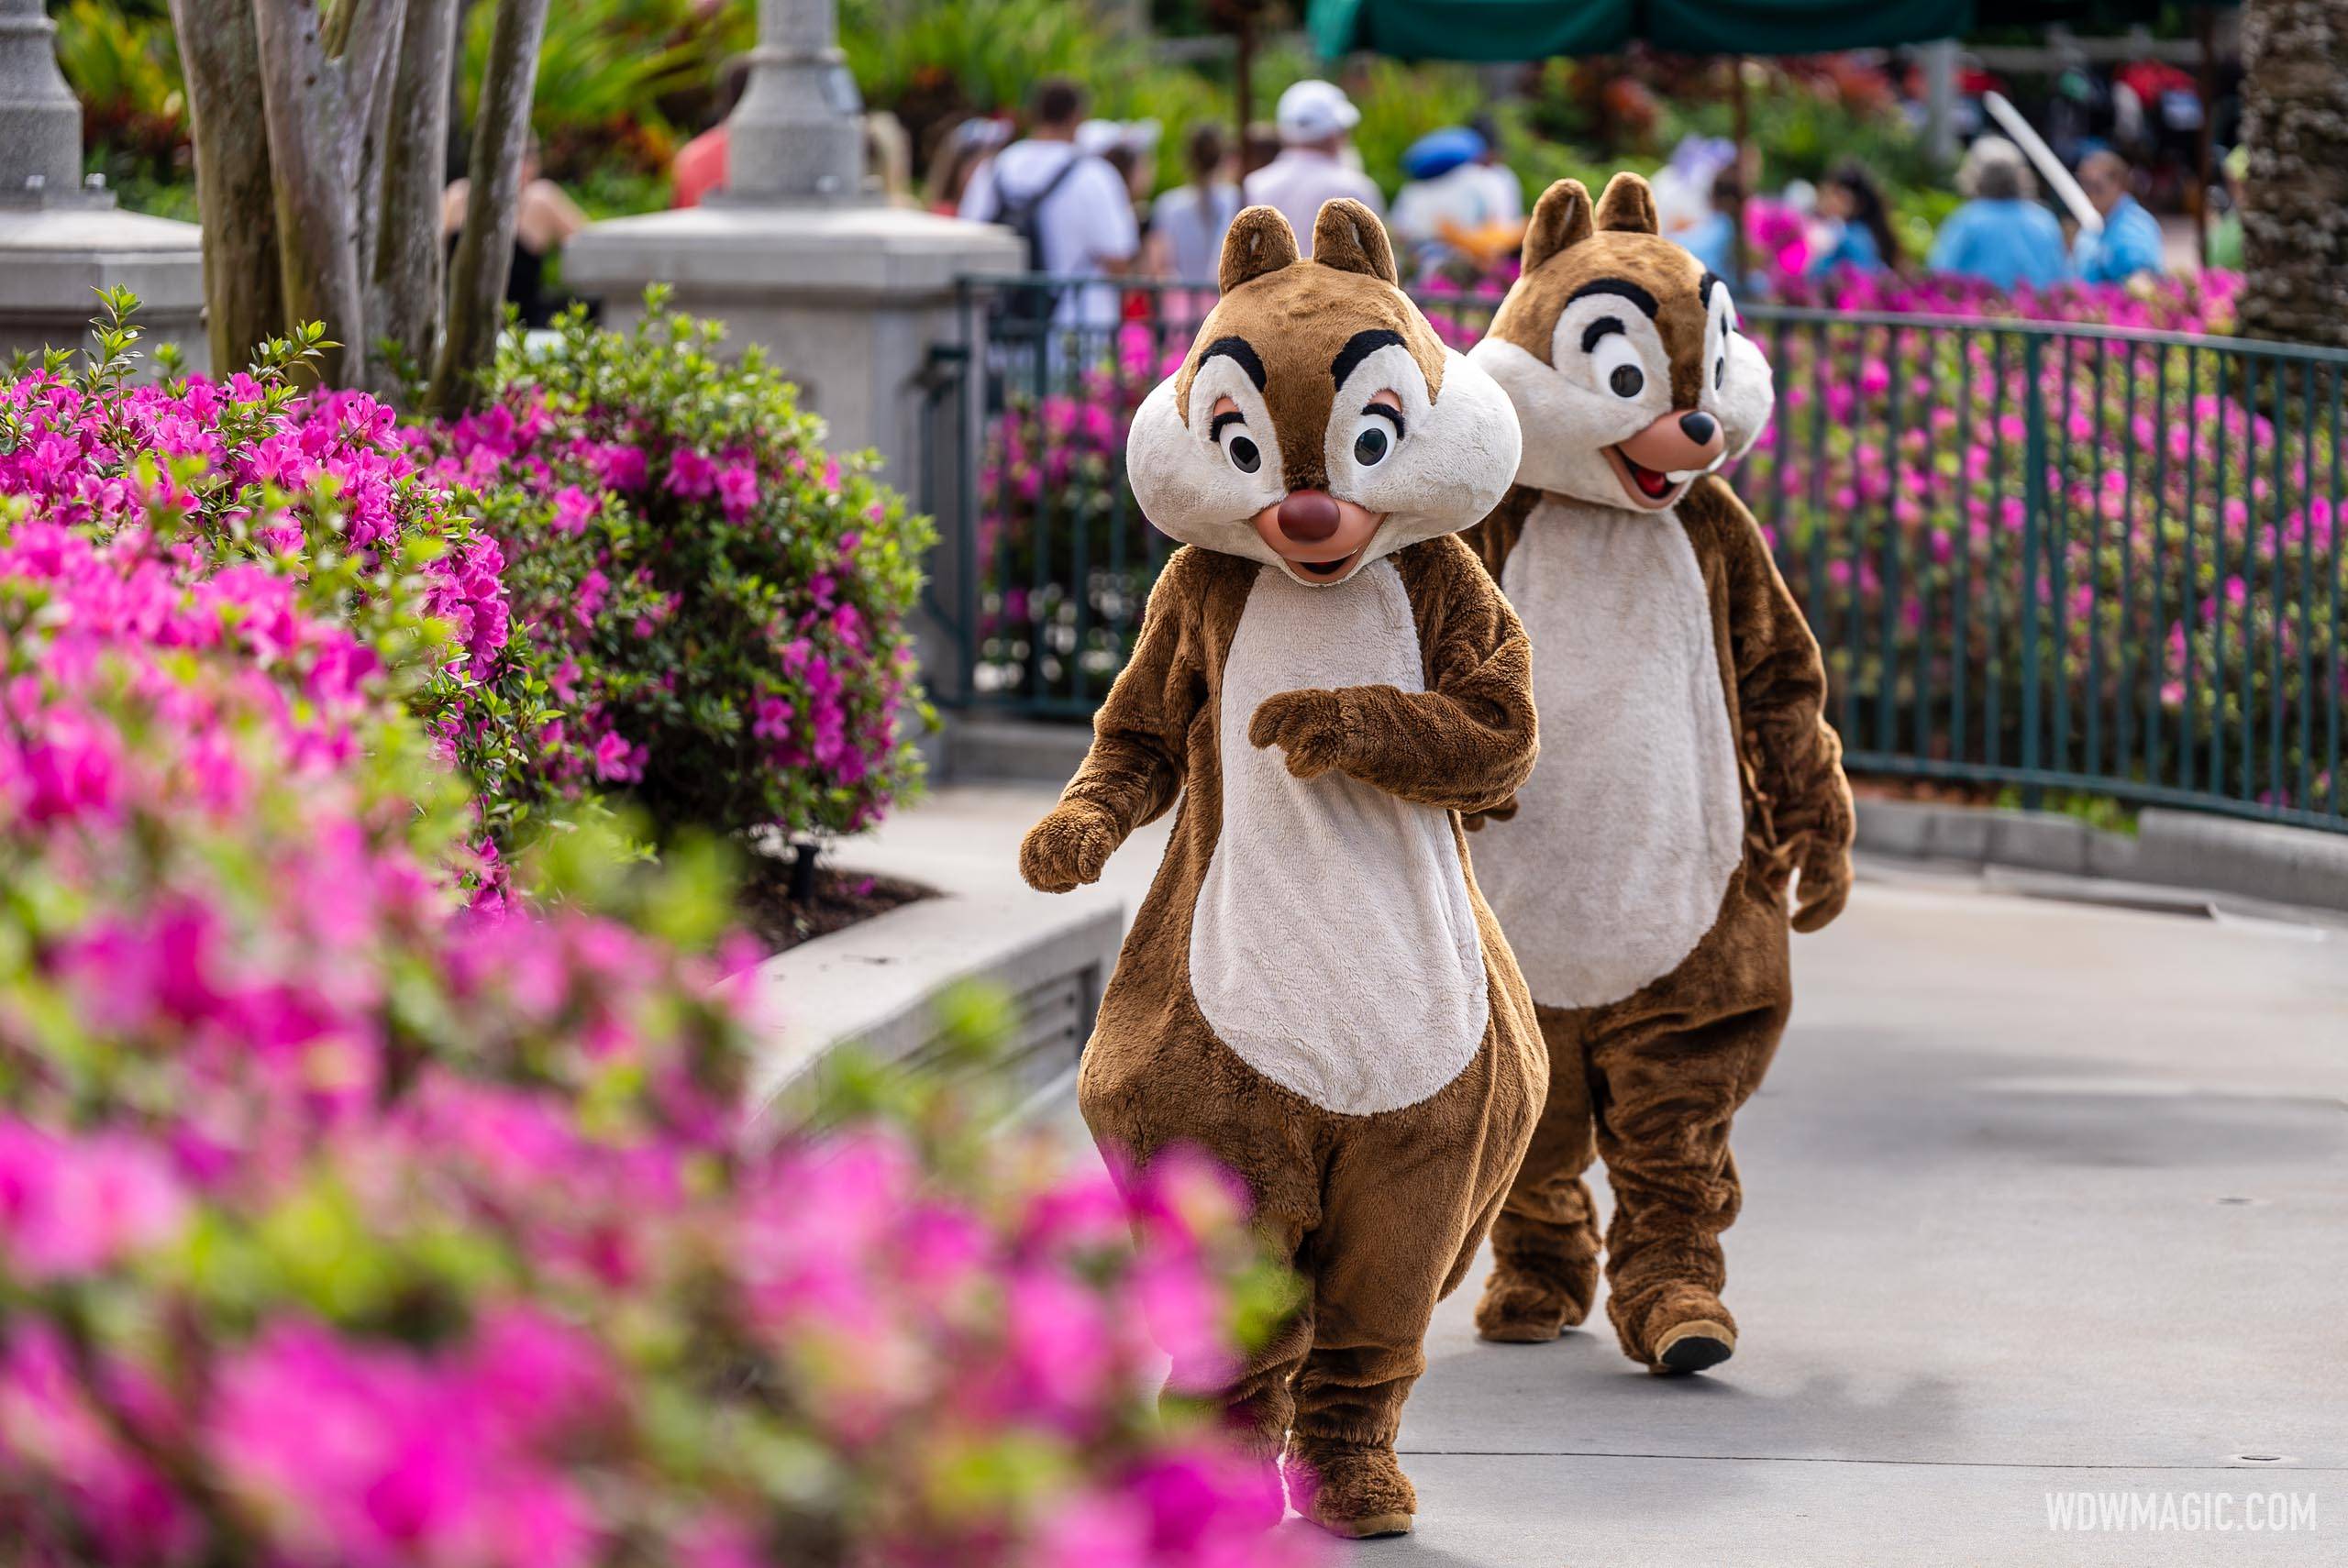 Donald, Daisy, Chip, and Dale return to traditional character meet and greets at Disney's Hollywood Studios